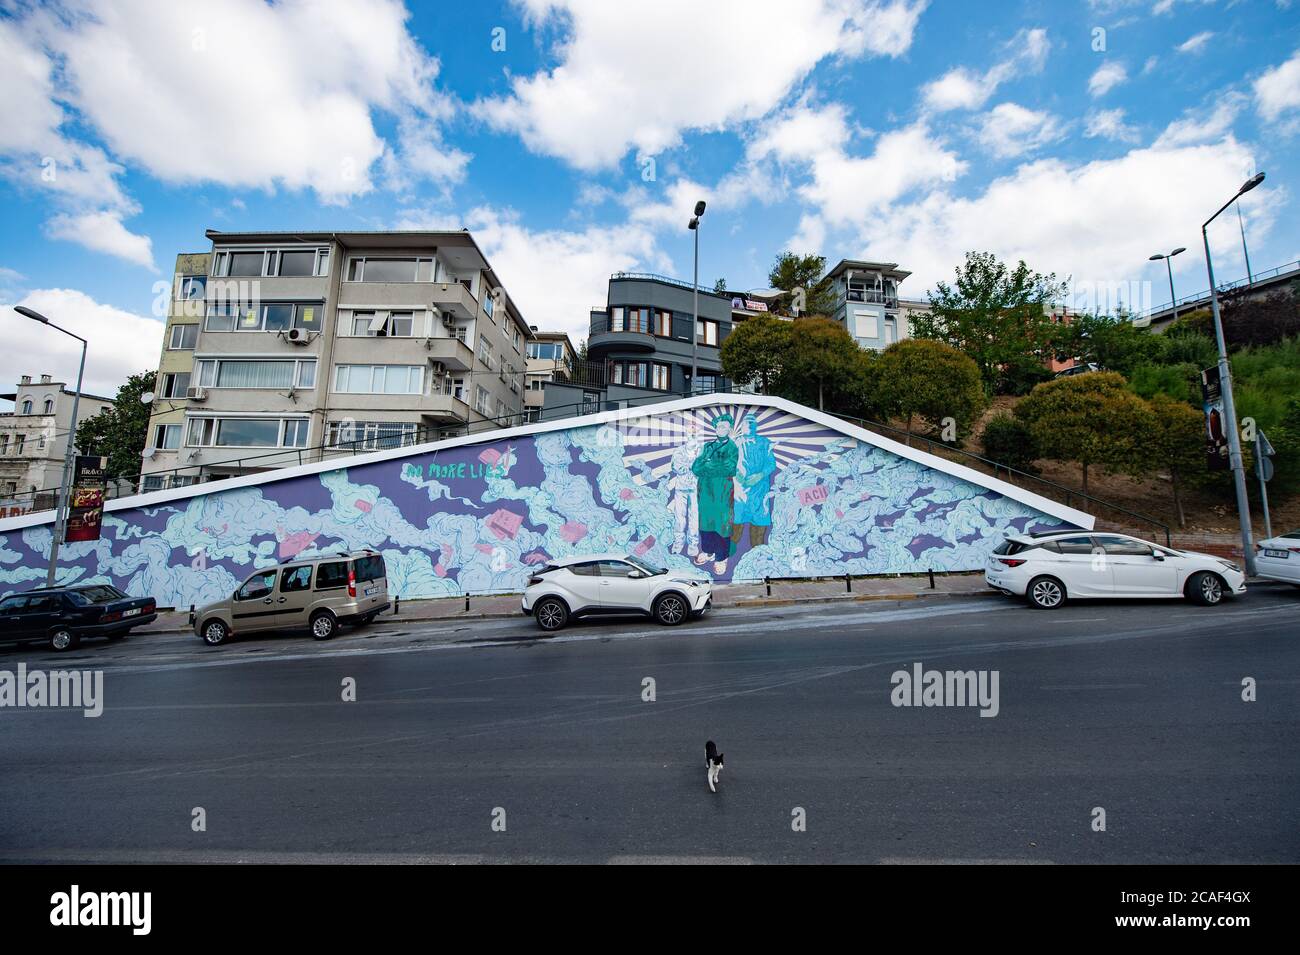 Istanbul, Turkey. 6th Aug, 2020. A giant mural painting dedicated to healthcare workers is seen in the Besiktas district in Istanbul, Turkey, on Aug. 6, 2020. A Turkish street artist, in Turkey's most populous city Istanbul, has dedicated a giant mural painting to healthcare workers who have been fighting the COVID-19 pandemic. The artist, known as No More Lies, created his art over a 46-meter-long and 6-meter high wall in the Ortakoy neighborhood in the Besiktas district, local authorities told Xinhua on Thursday. Credit: Yasin Akgul/Xinhua/Alamy Live News Stock Photo